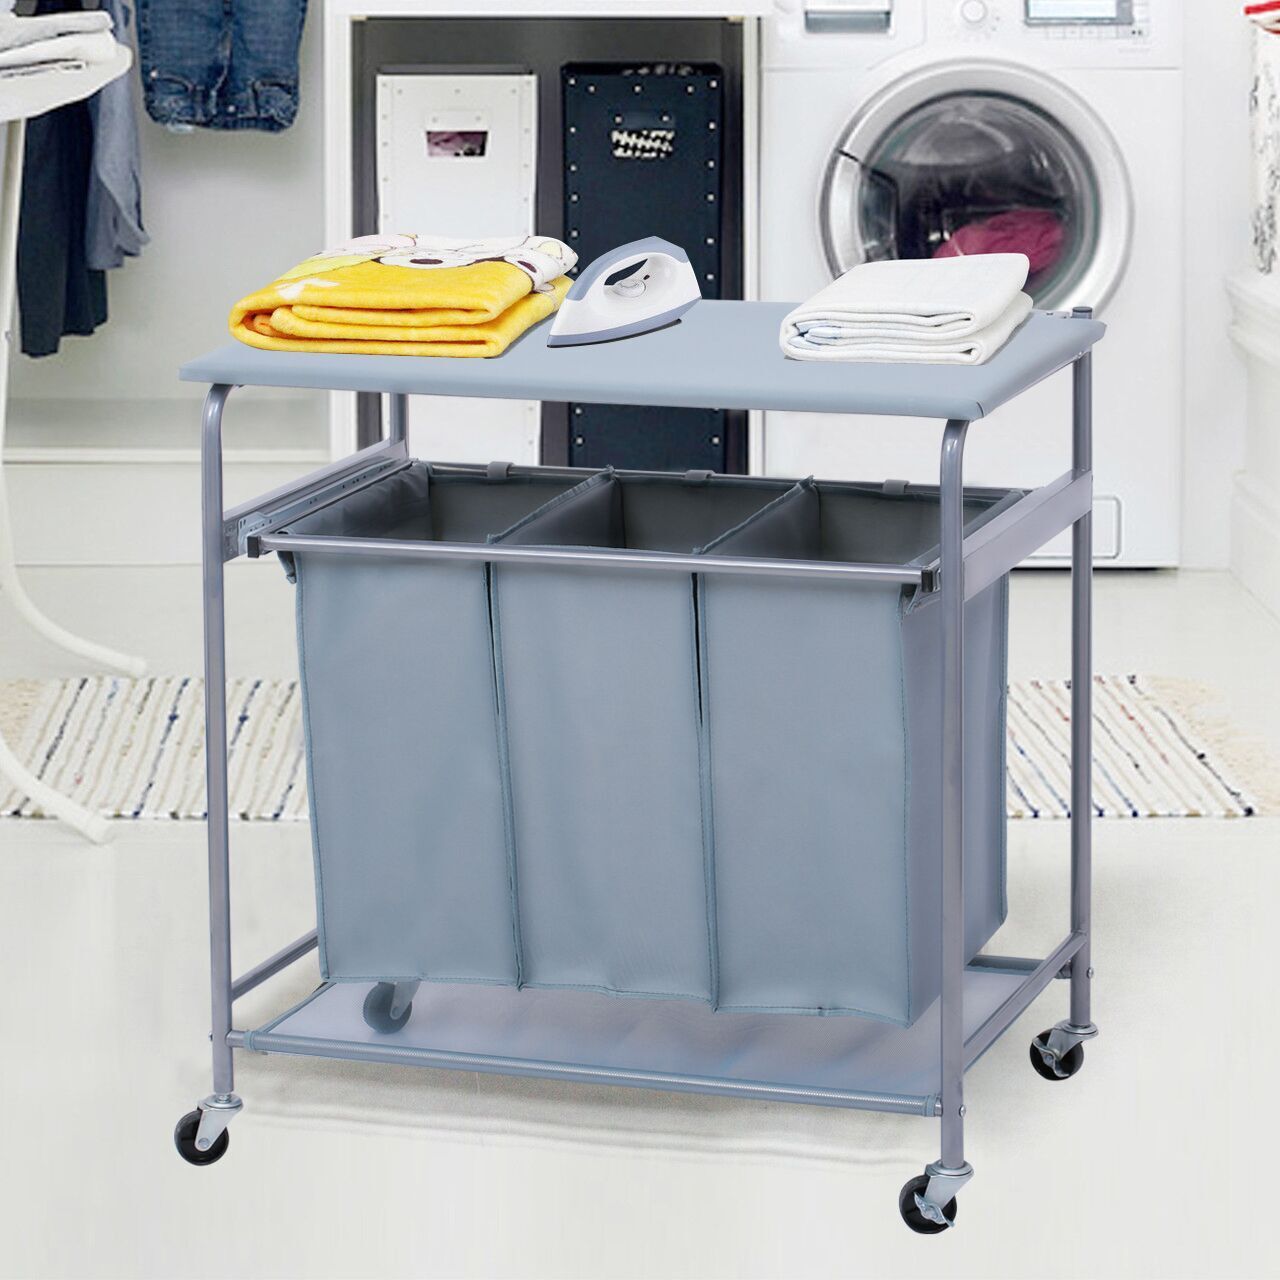 Laundry Hamper Trolley with Slide Tray 3 Washing Basket Bag Sort and Ironing Board